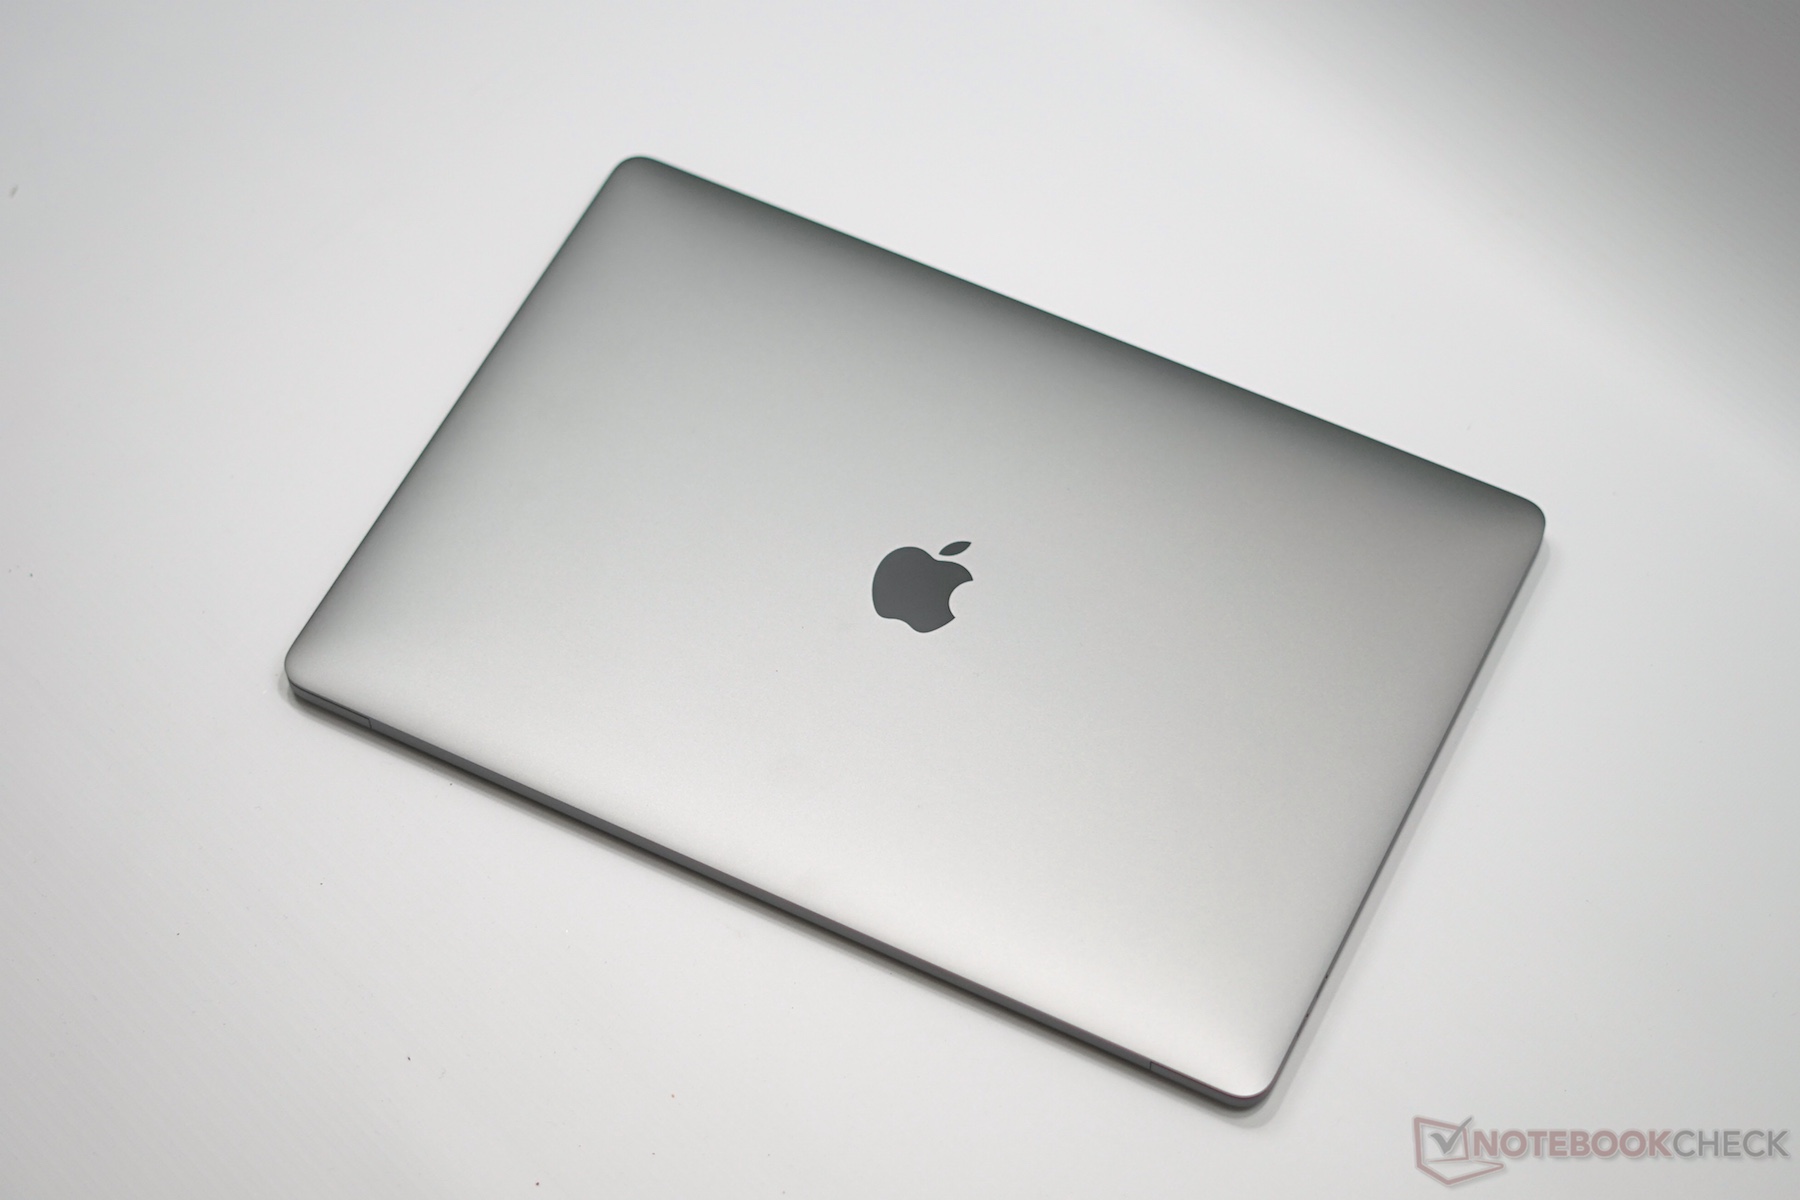 Apple MacBook Pro 15 (Late 2016 2.9 GHz, 460) Notebook Review 